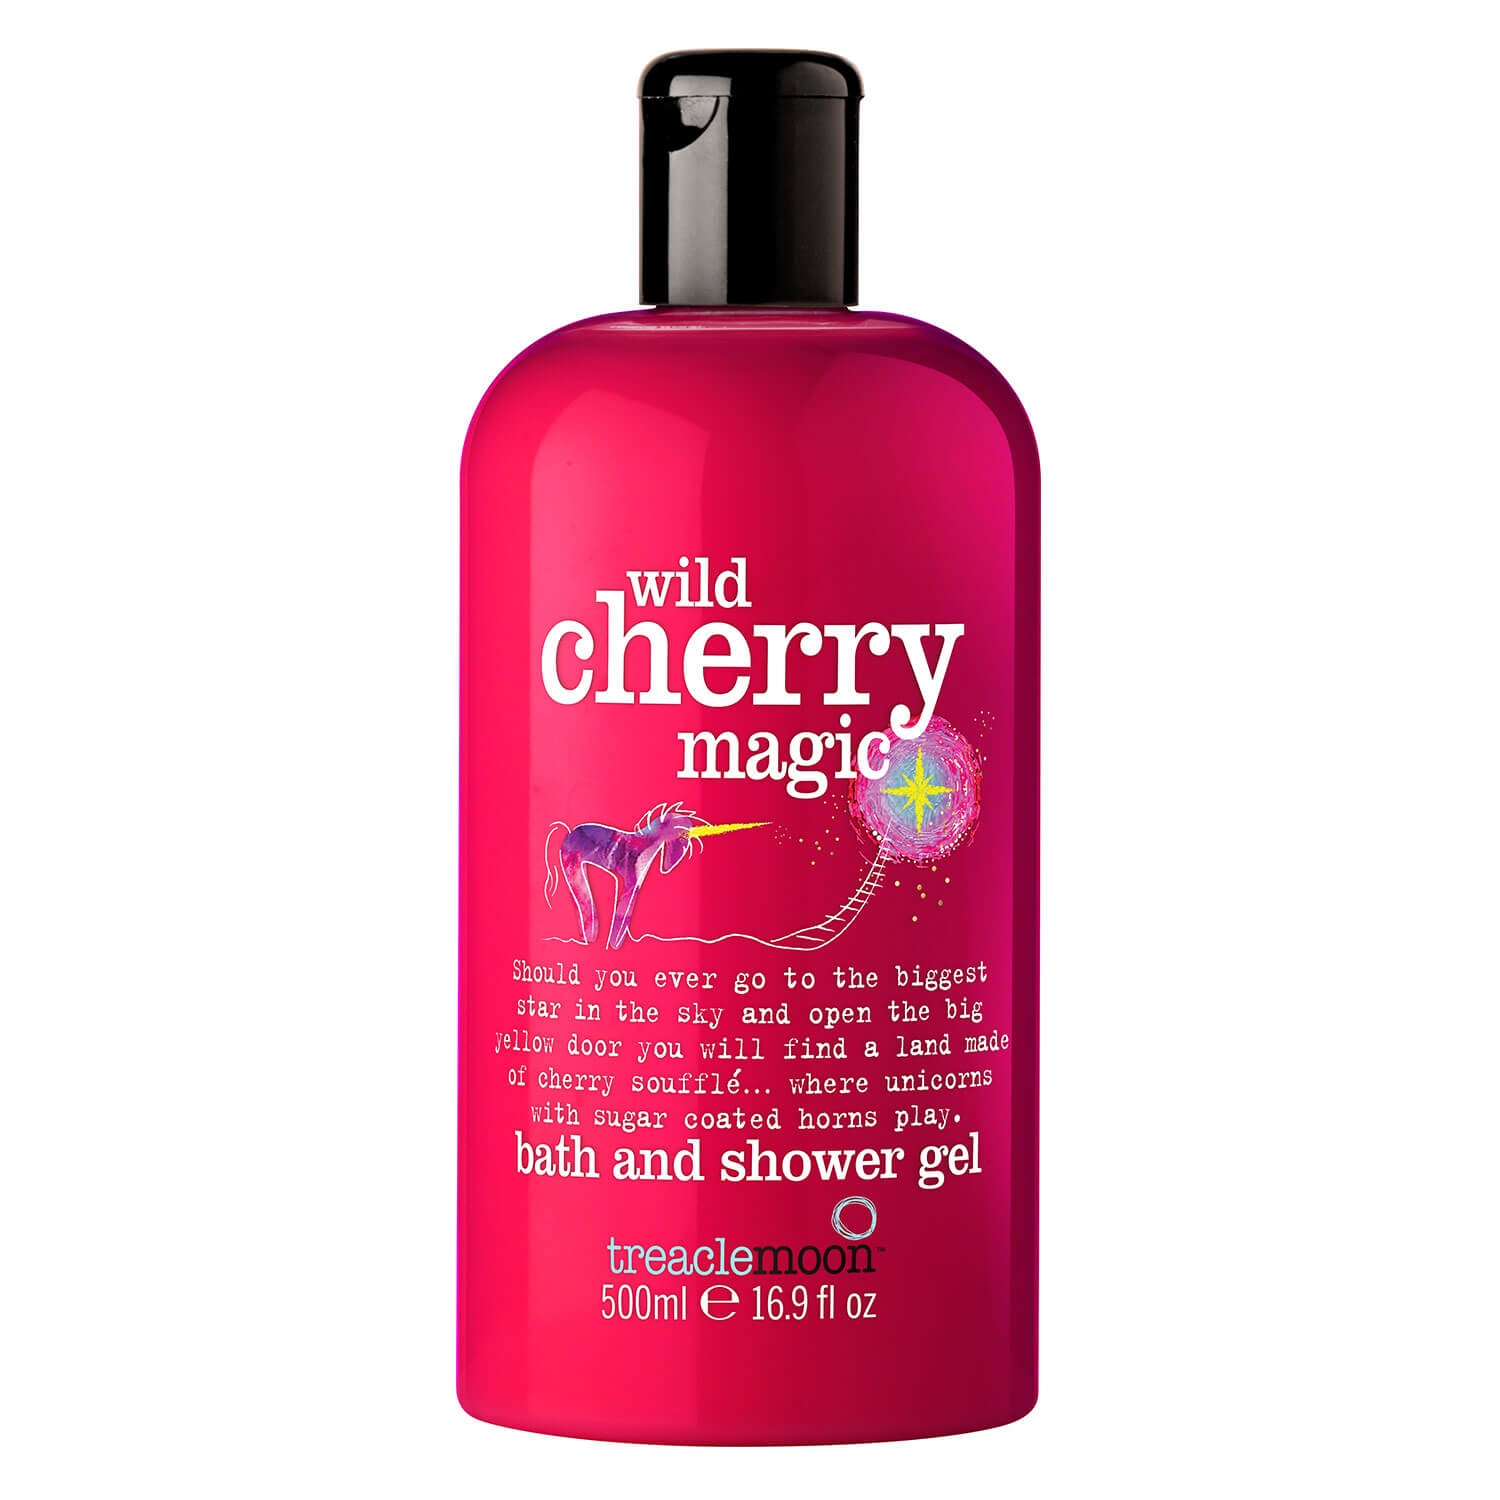 Product image from treaclemoon - wild cherry magic shower and bath gel